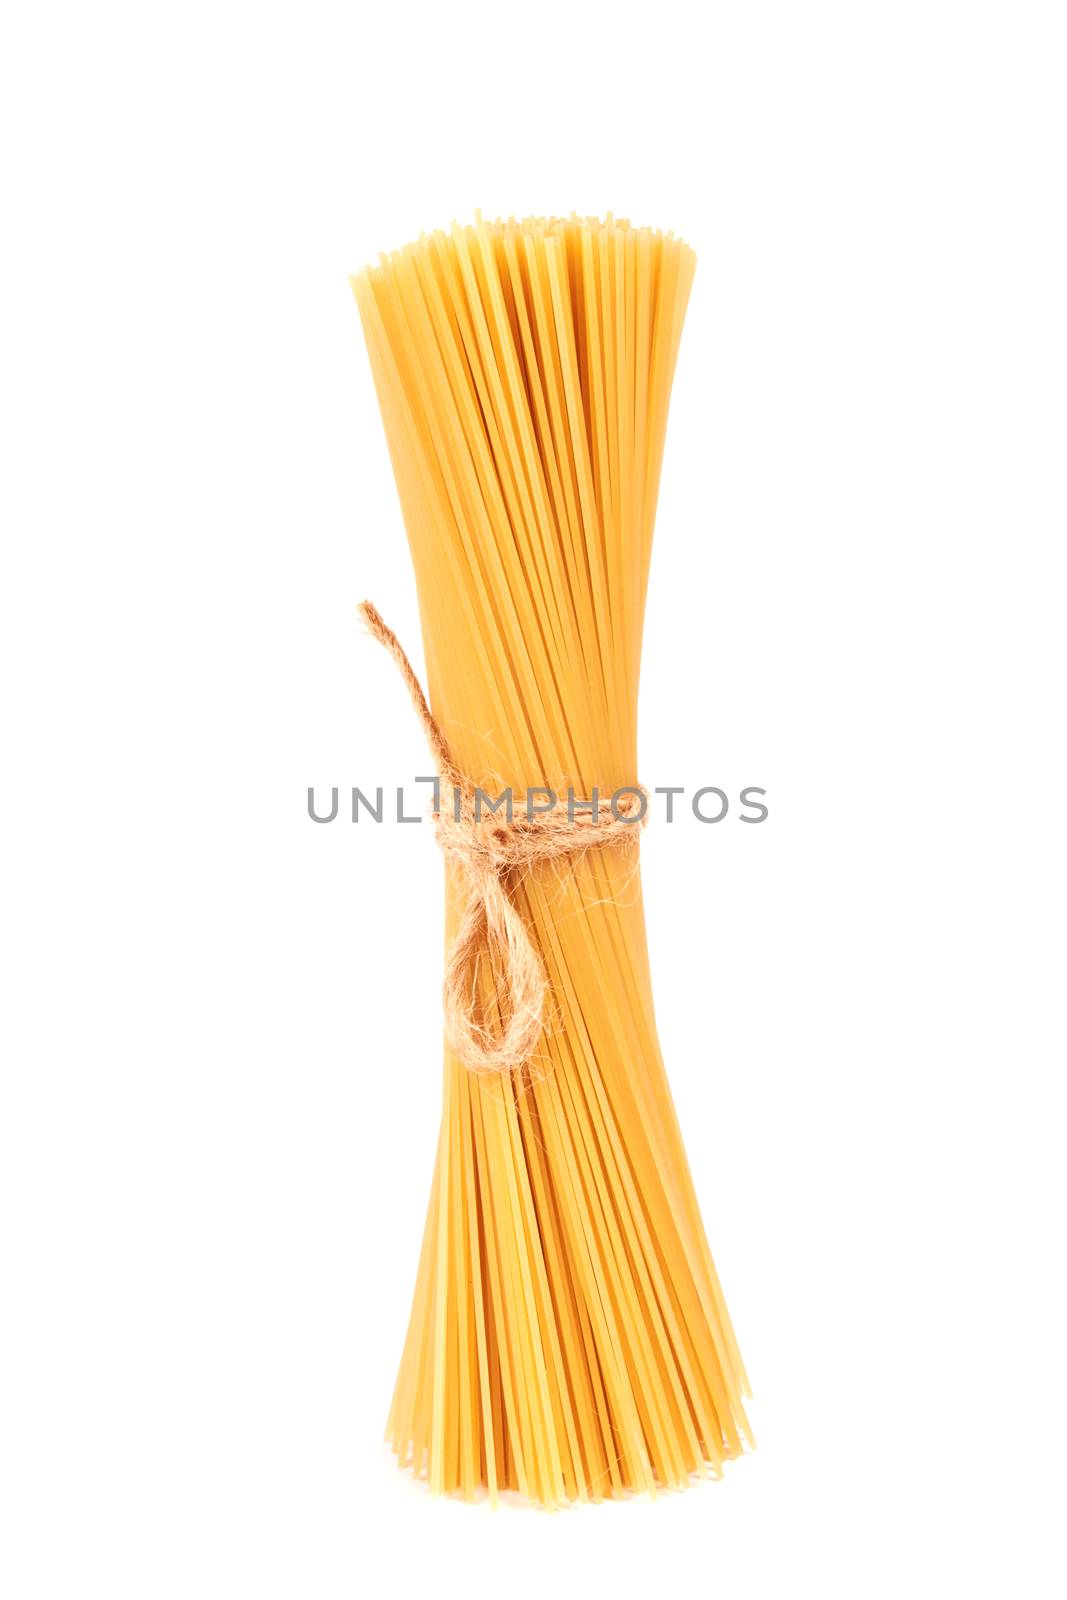 raw spaghetti isolated on a white background 